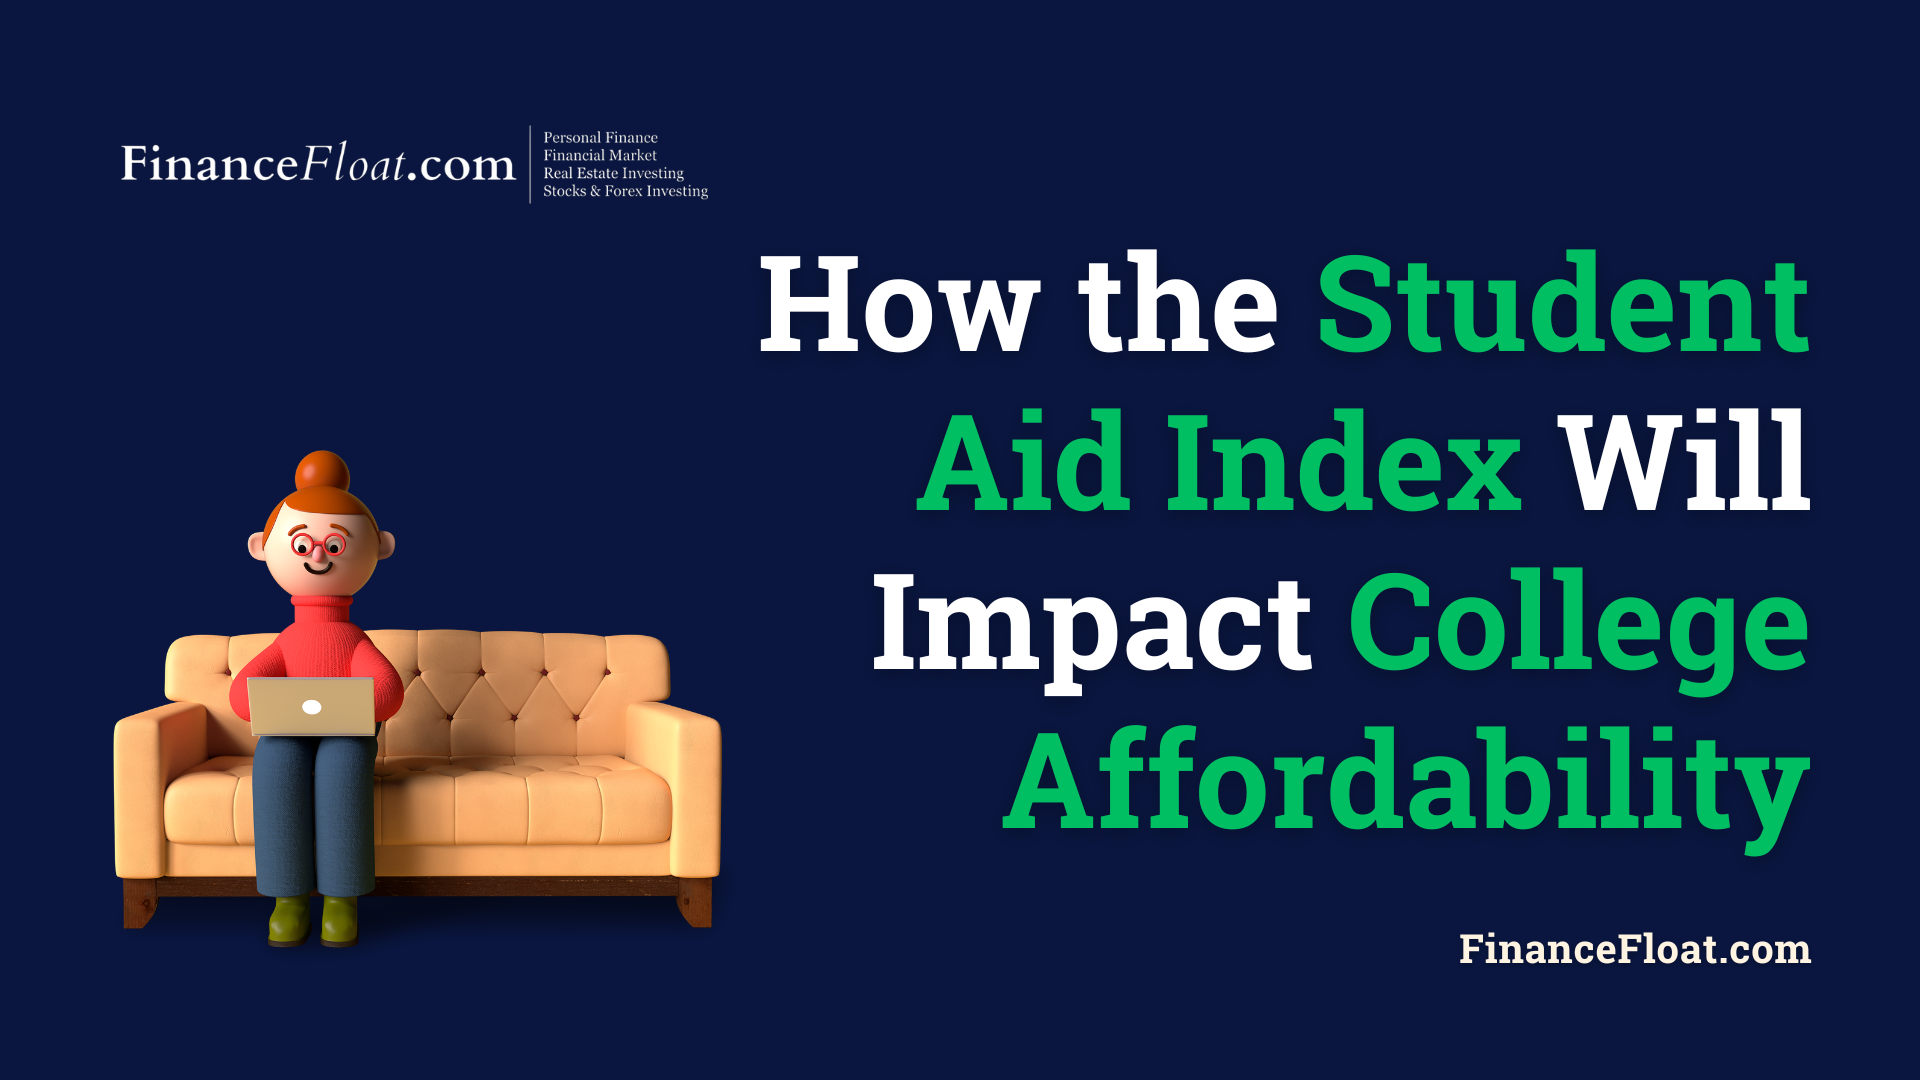 How the Student Aid Index Will Impact College Affordability